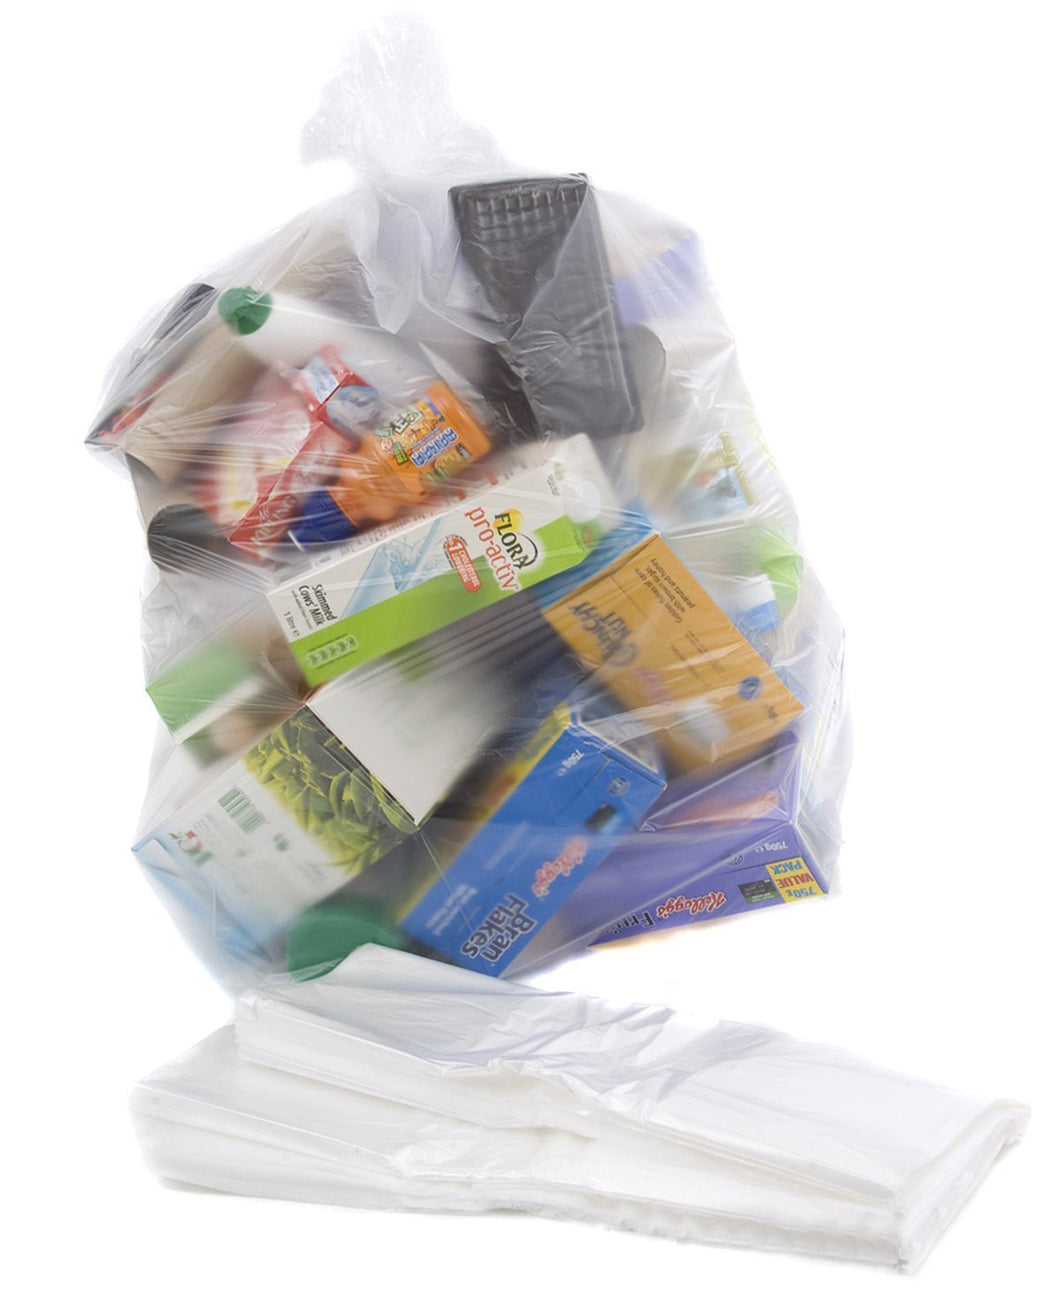 Recycling Bags – Valet Living